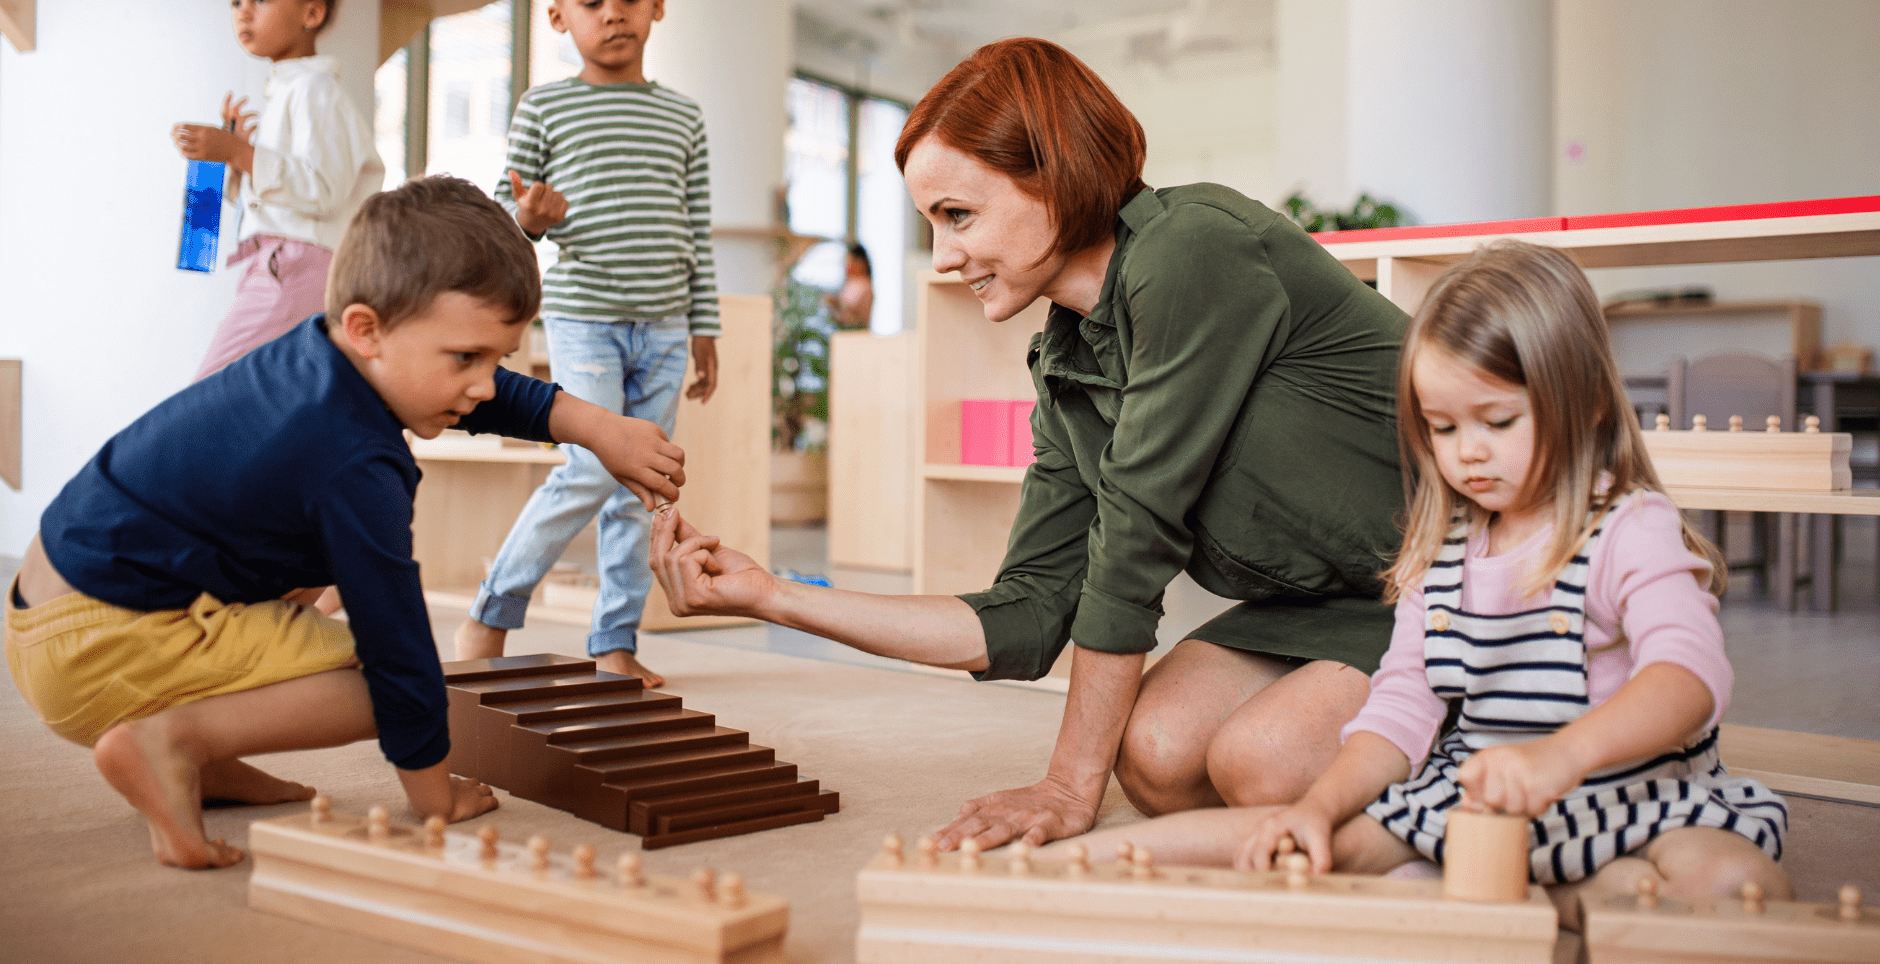 4 ways to Improve the Performance of Staff in Montessori Childcare Settings 2022